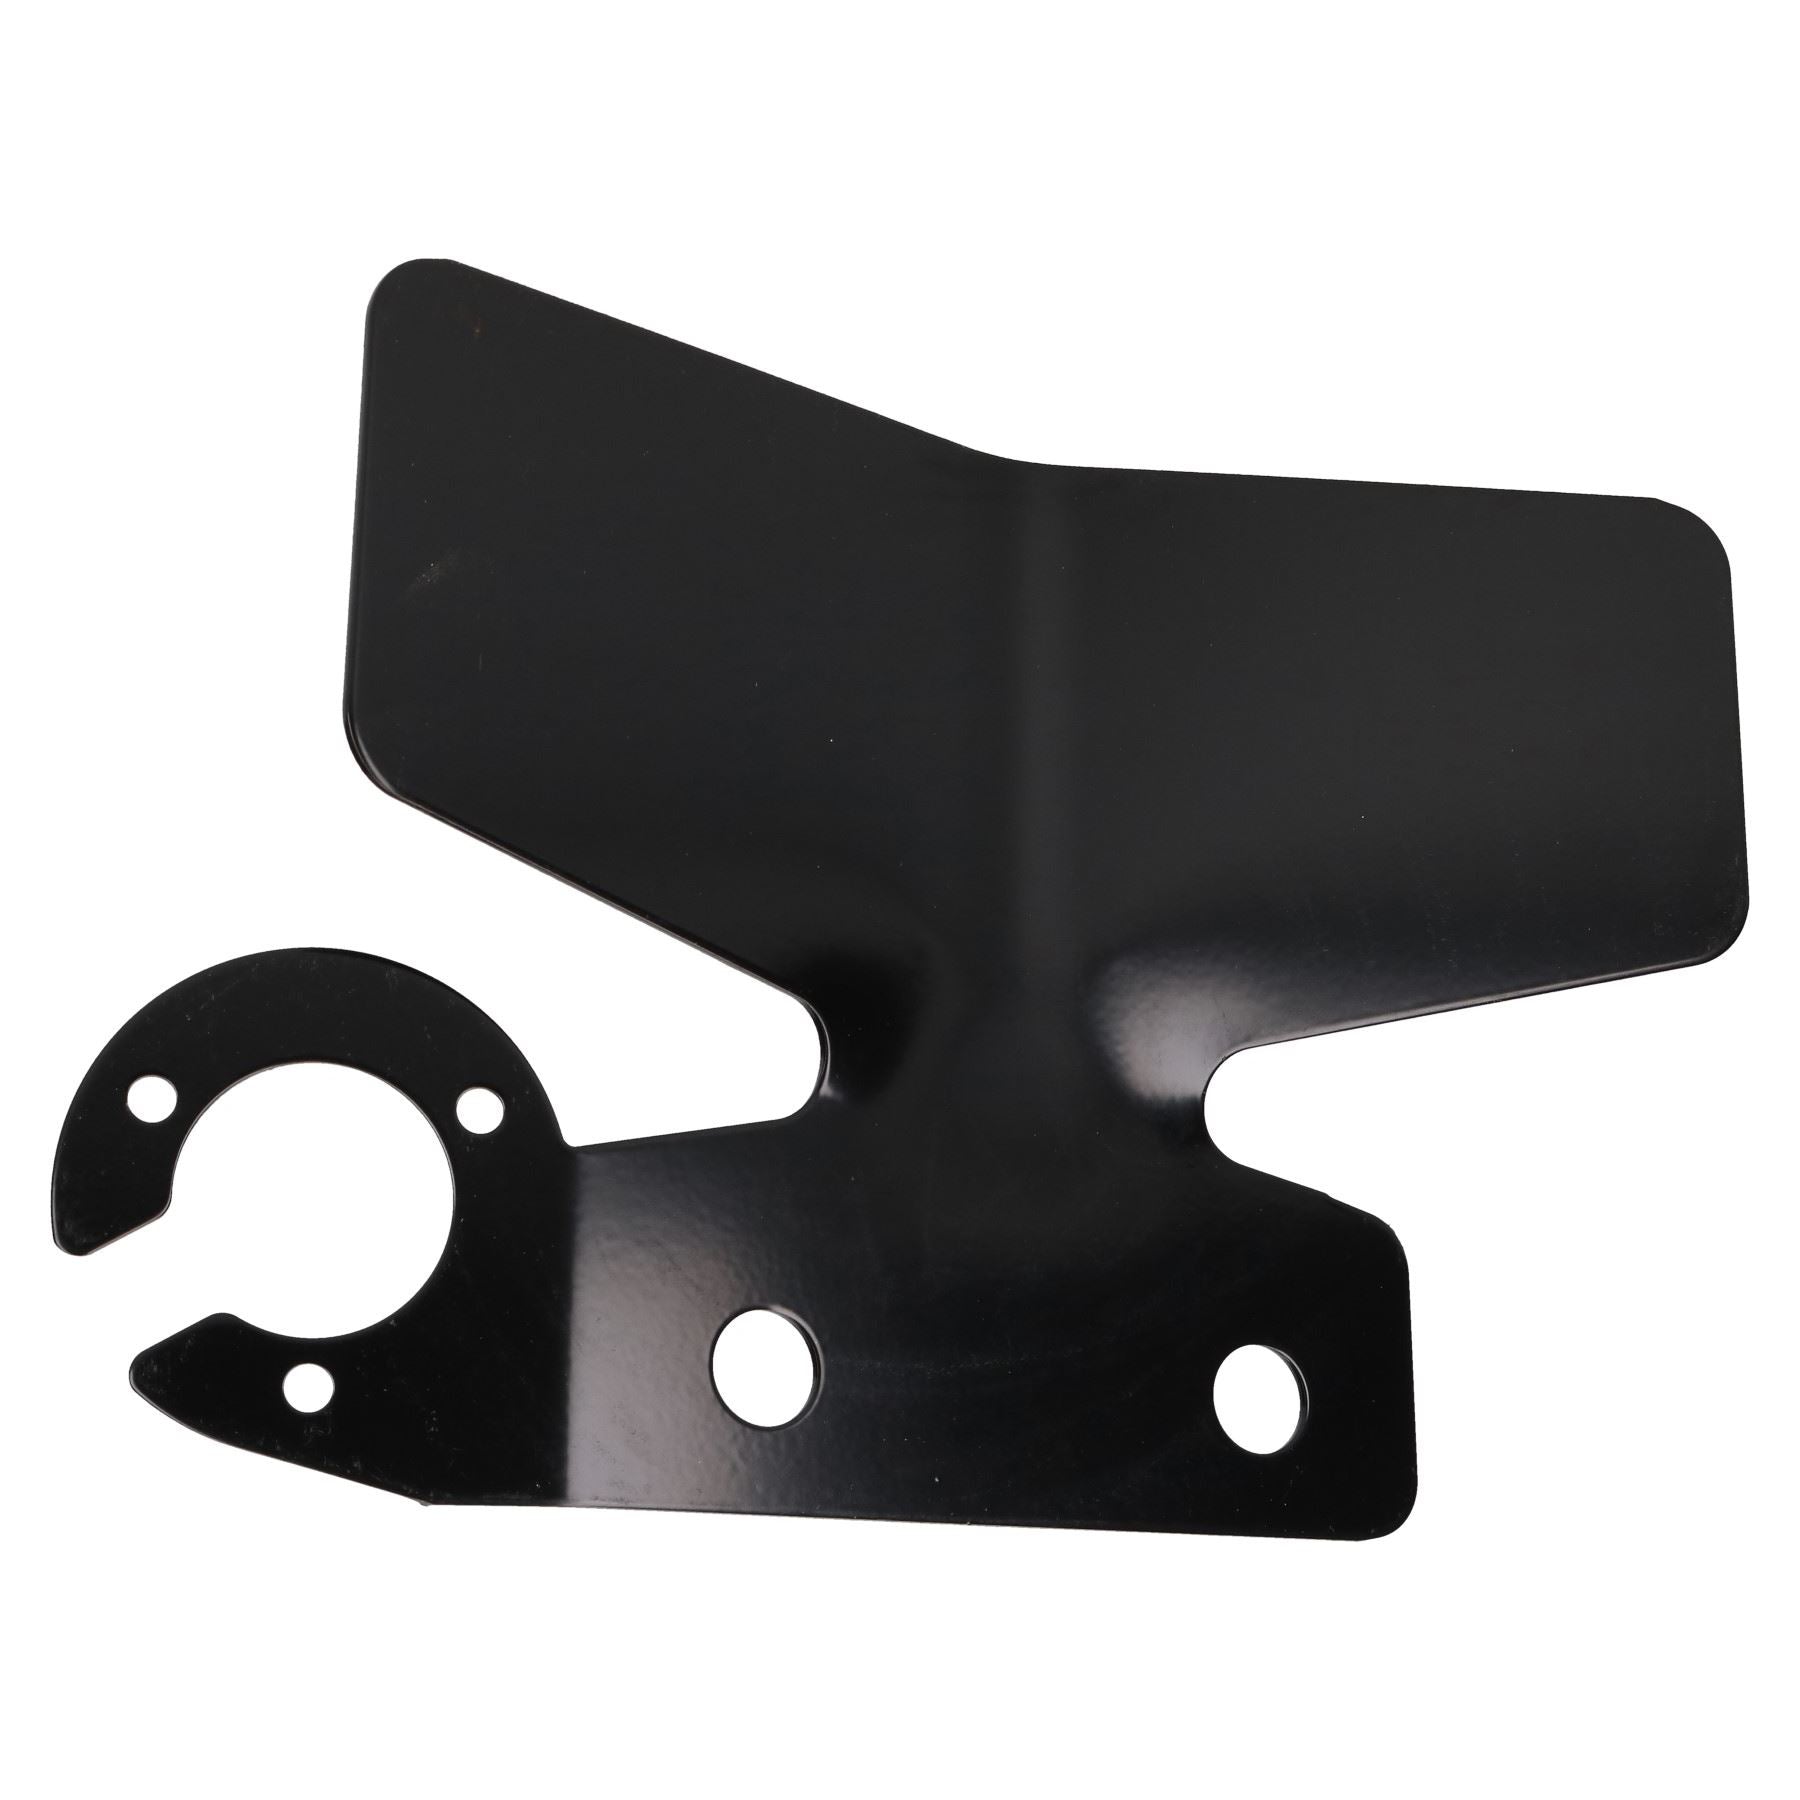 Black Tow Bar / Ball Bumper Protector with Towing Electrics Socket Mount